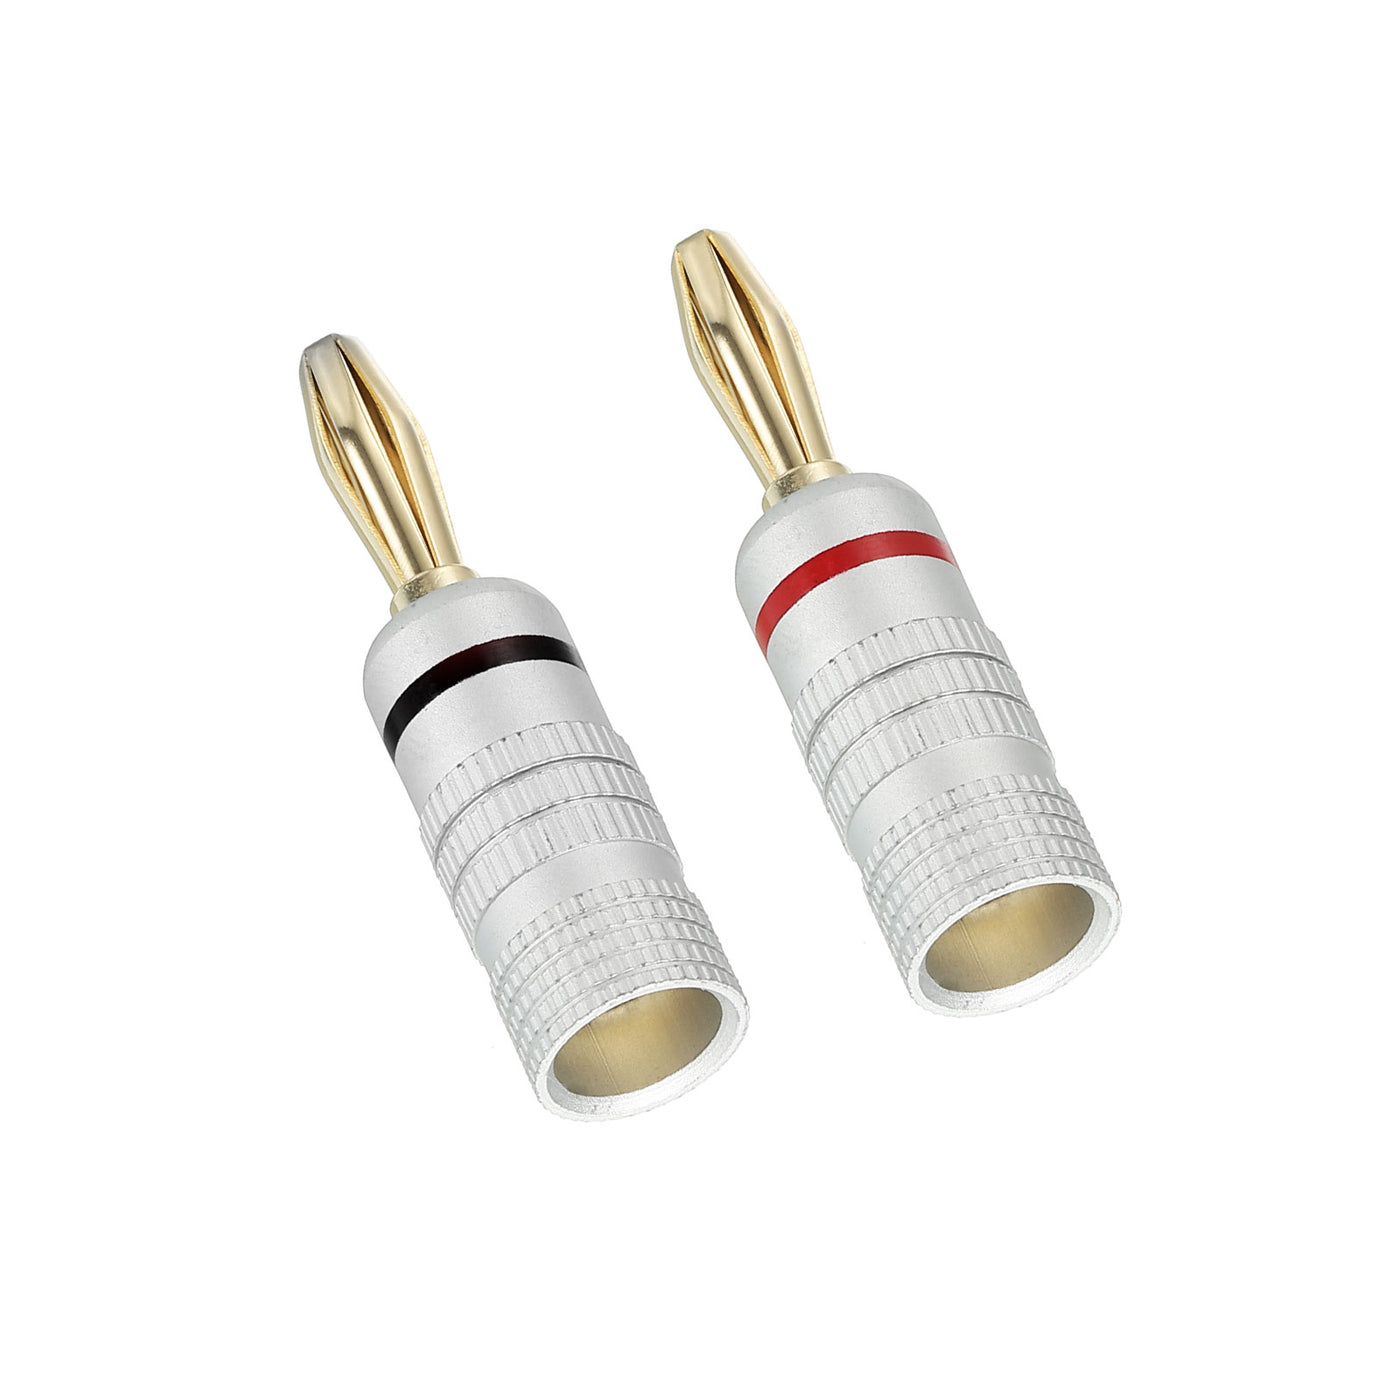 Harfington Banana Plugs Speaker Banana Plugs Closed Screw Type 4mm Gold-Plated Copper Straight Head for Speaker Wires, Sound Systems, Video Receivers Pack of 2